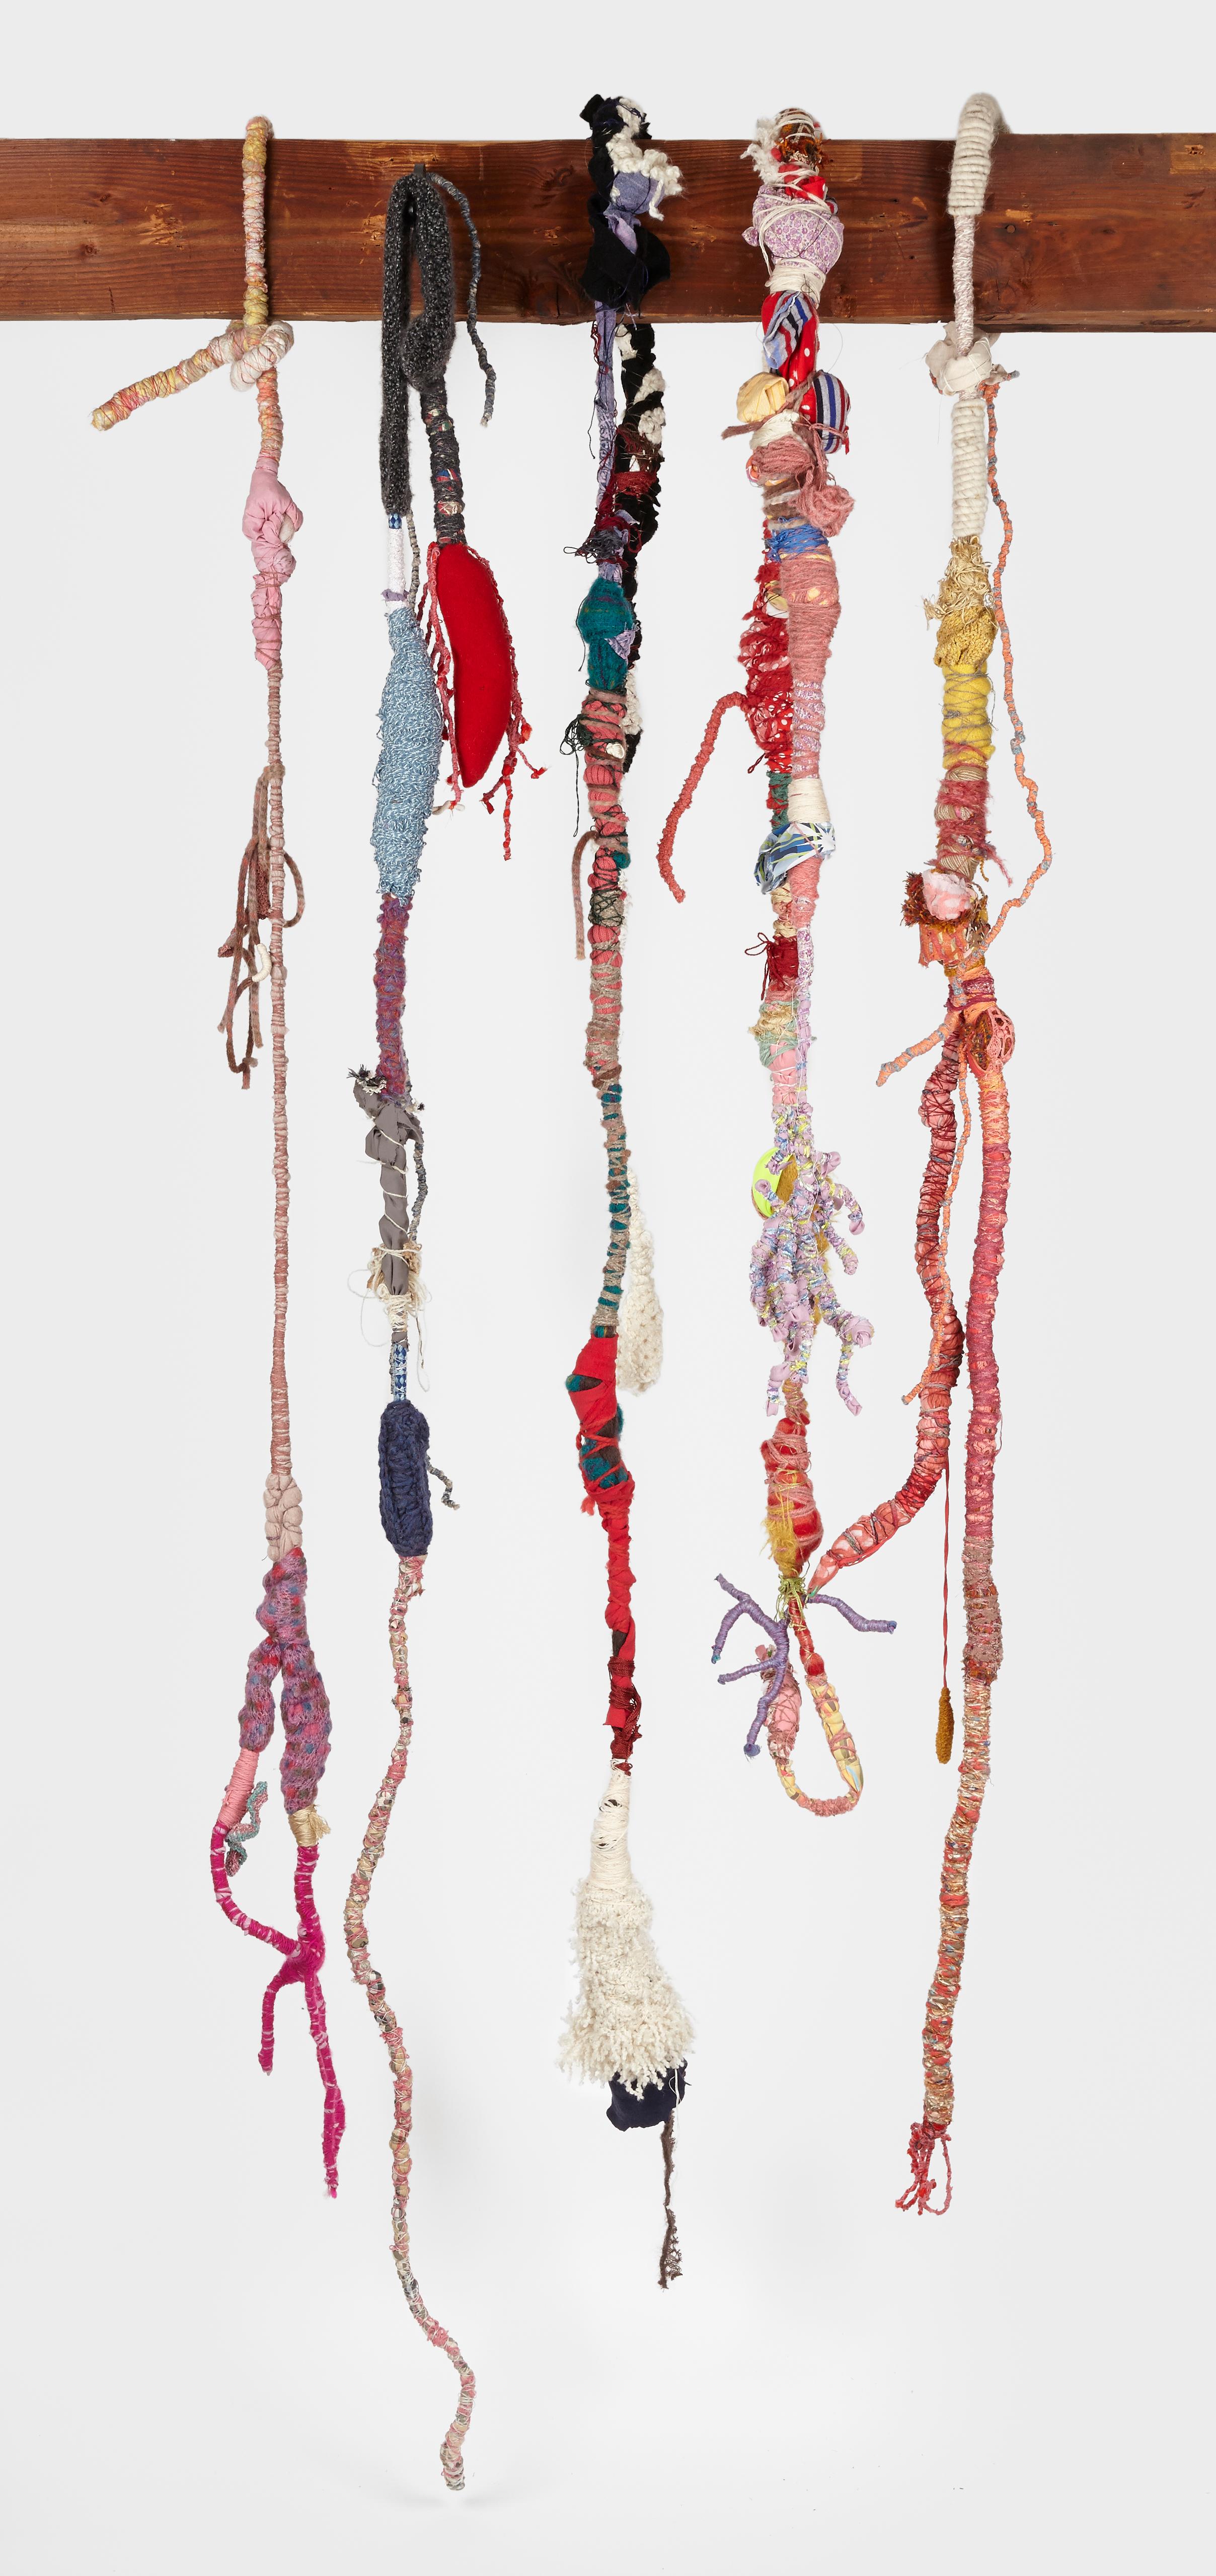 Fancy Ropes 2 - Mixed Media Art by Jane Miller